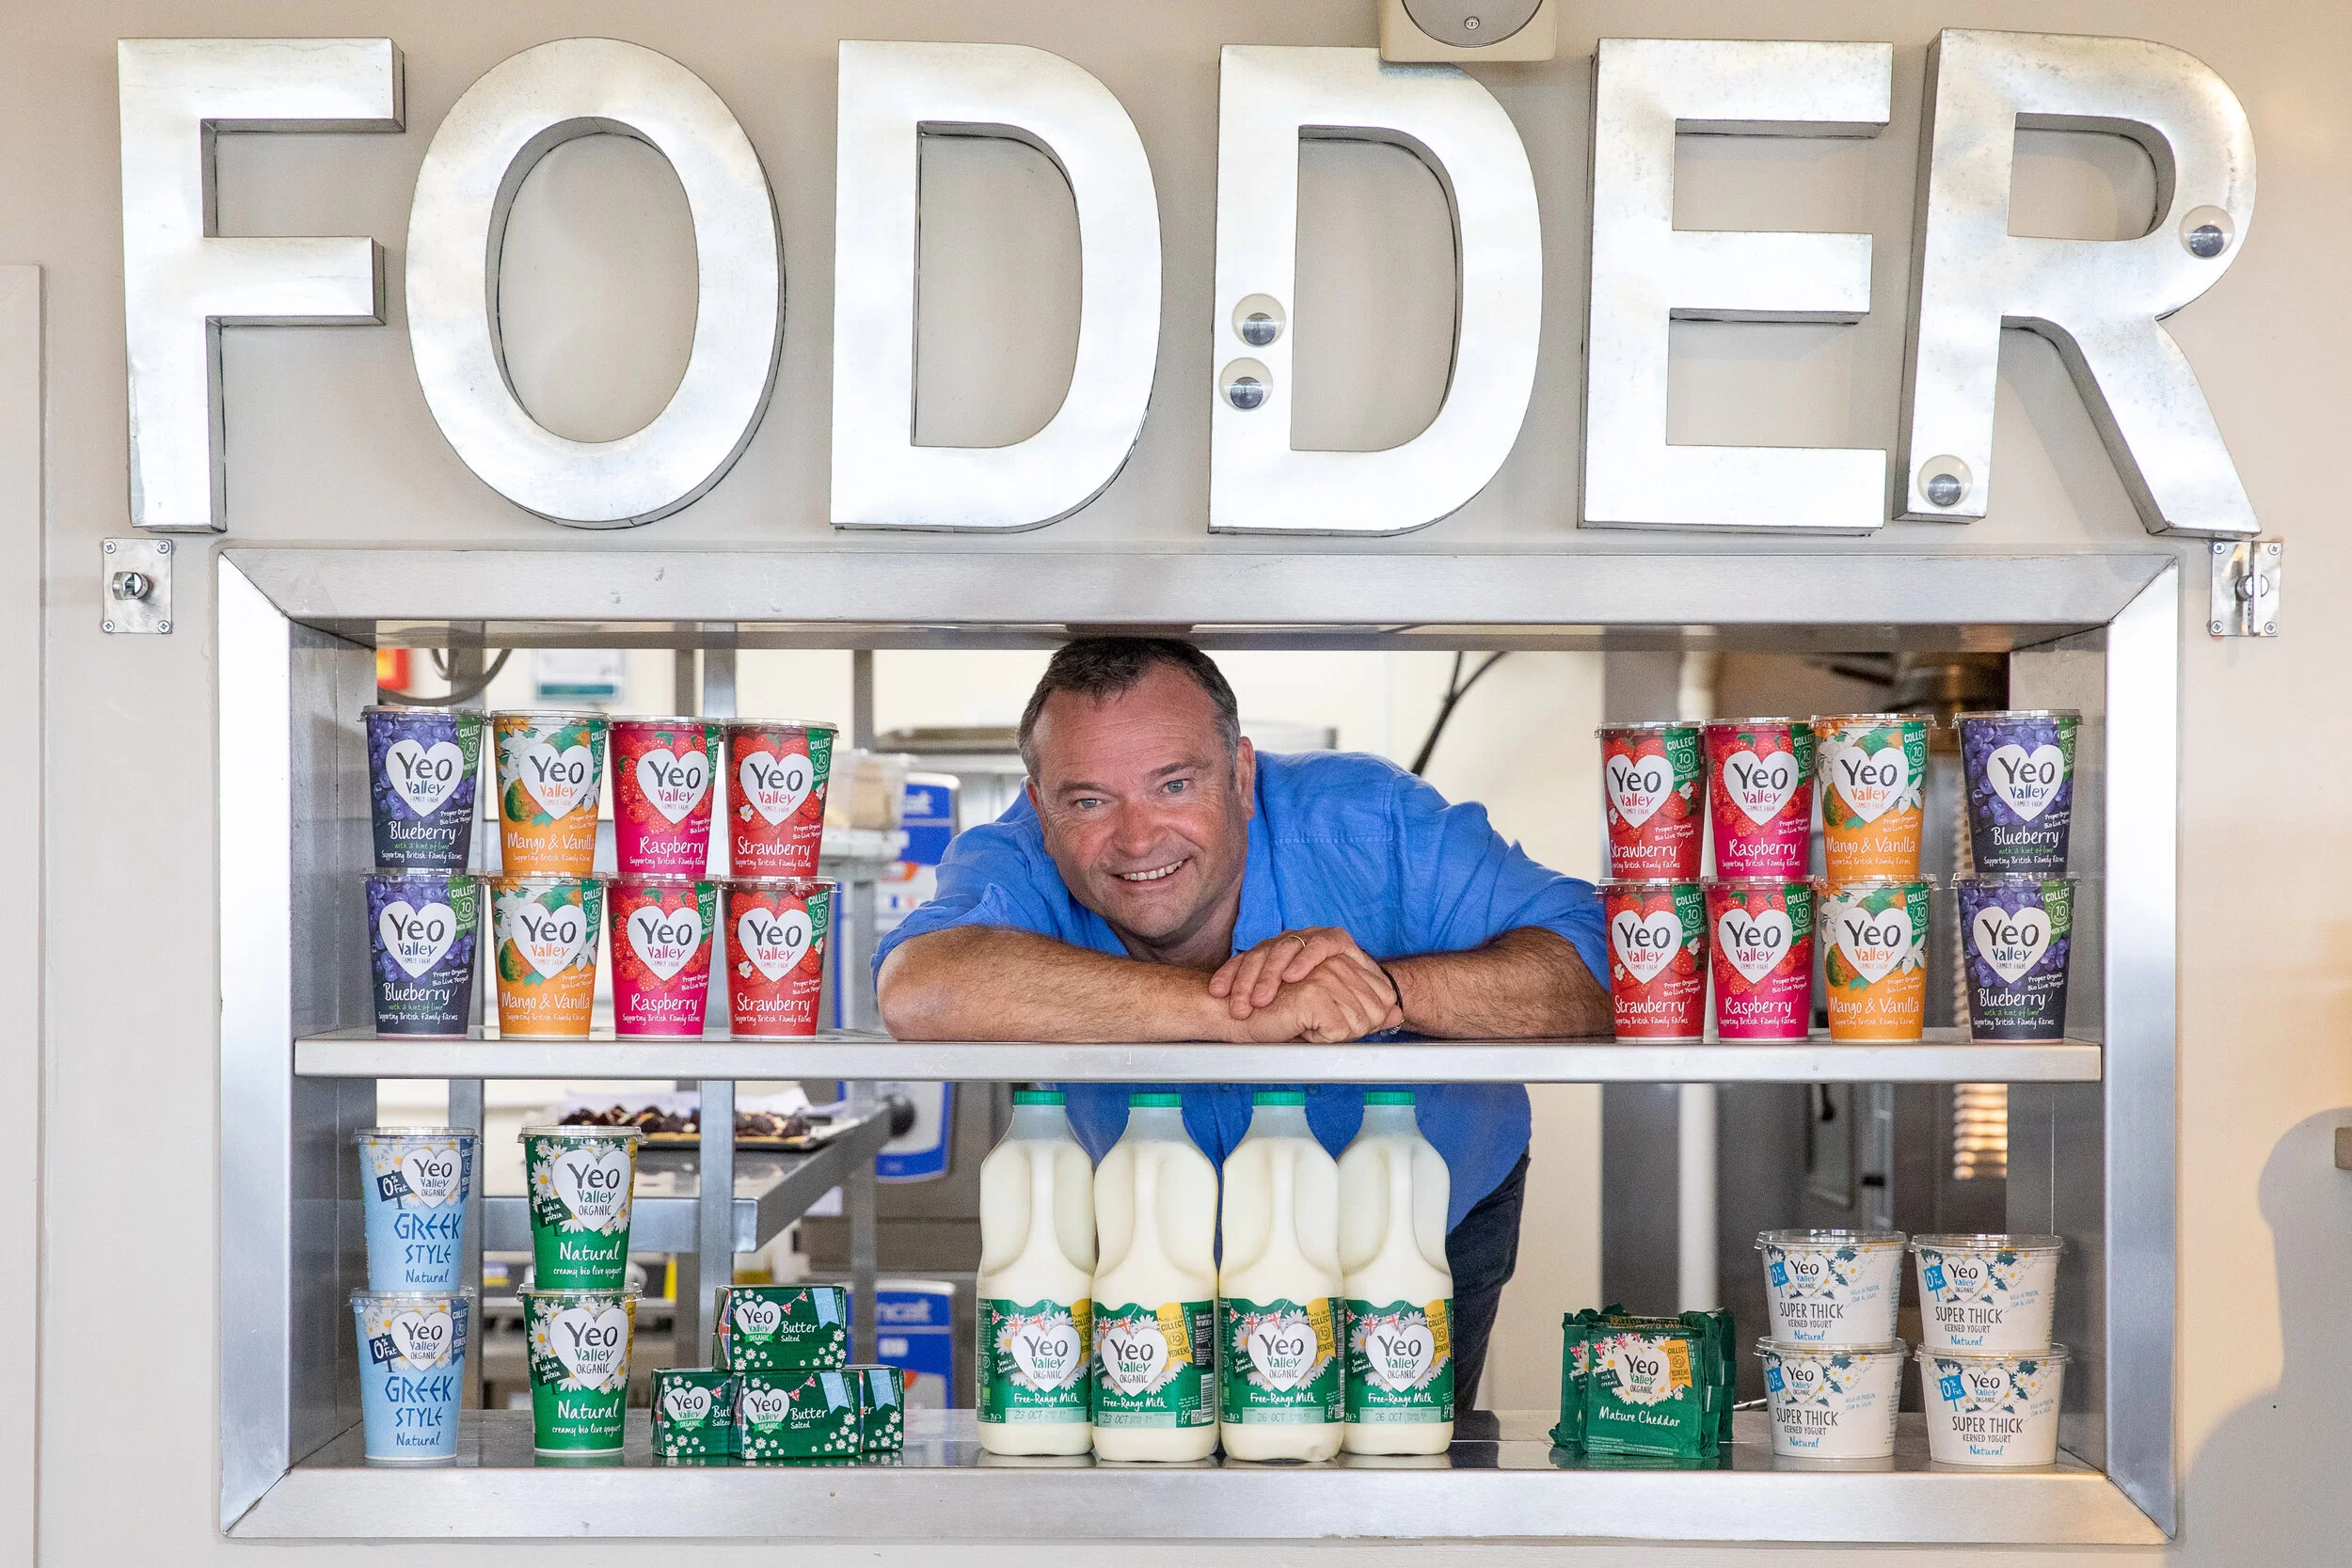 Tim Mead, founder of Yeo Valley, smiling at the camera, surrounded by Yeo Valley products, with a FODDER sign above him. 